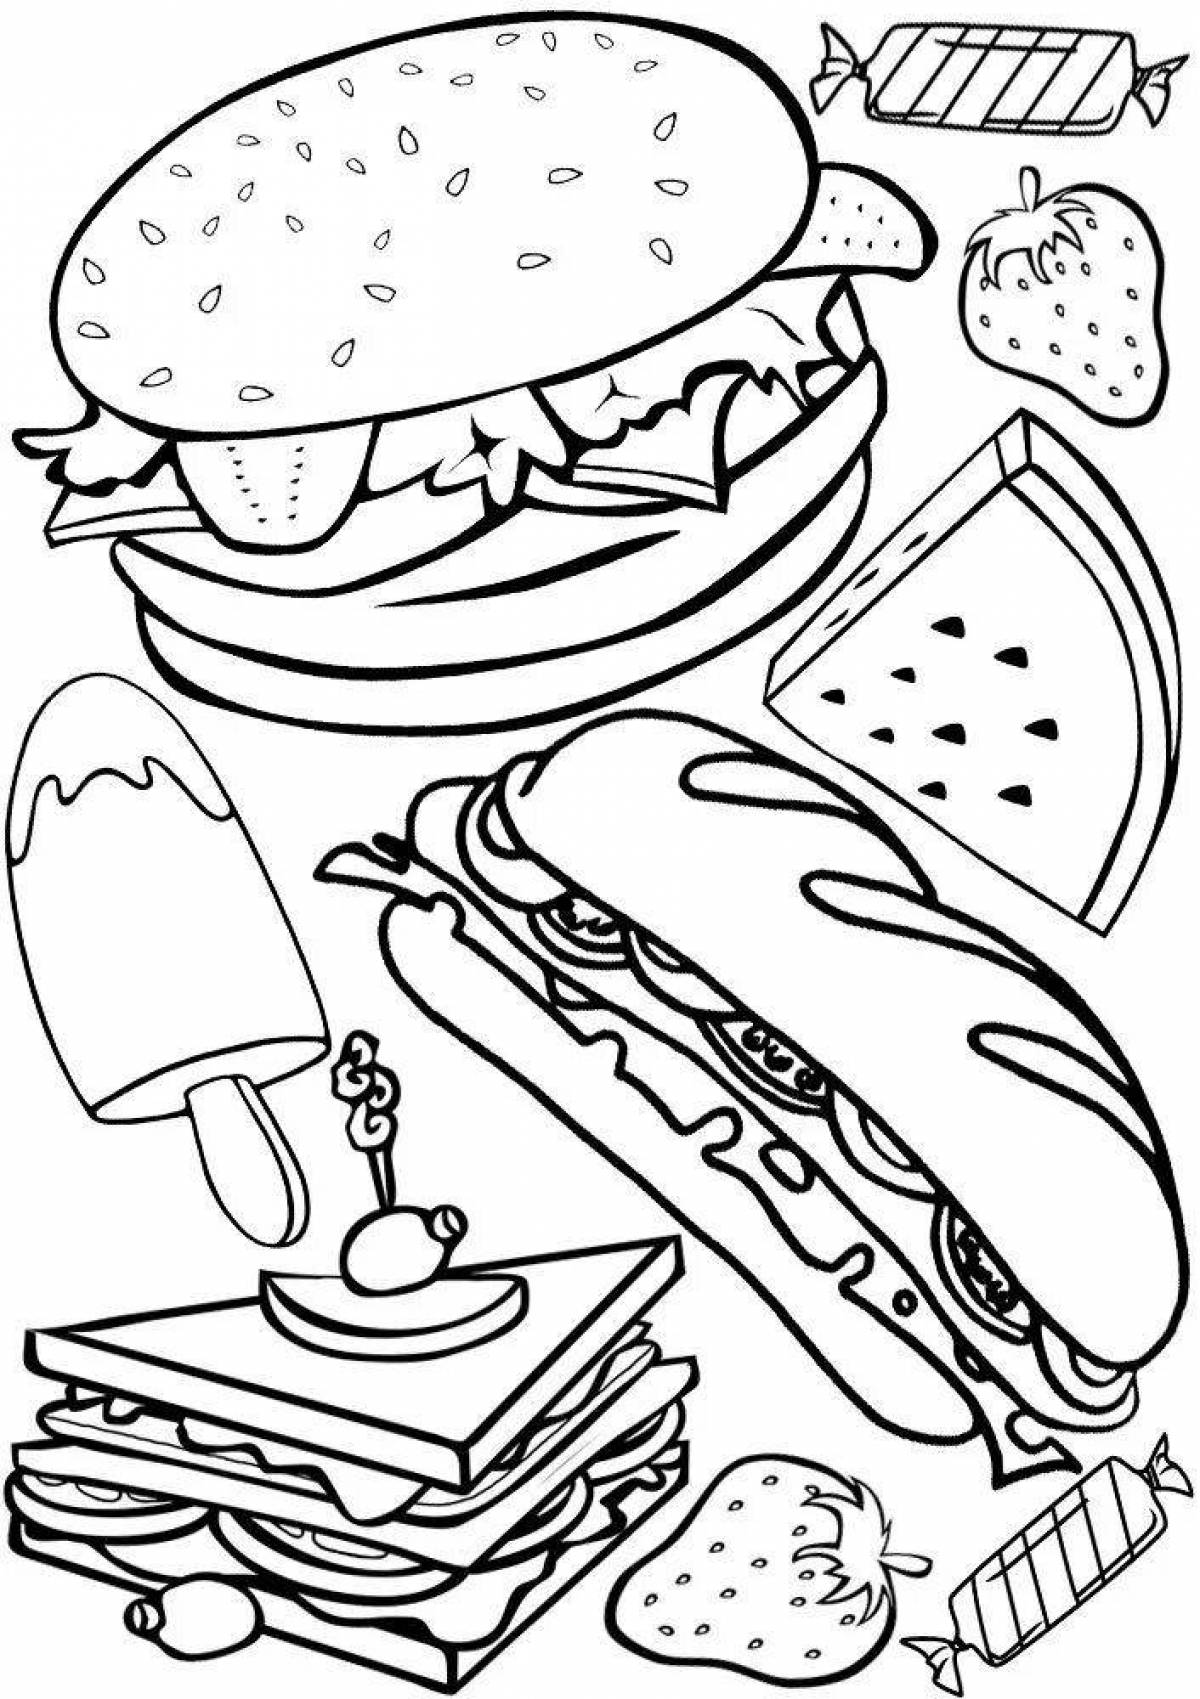 Colourful burger coloring book for kids